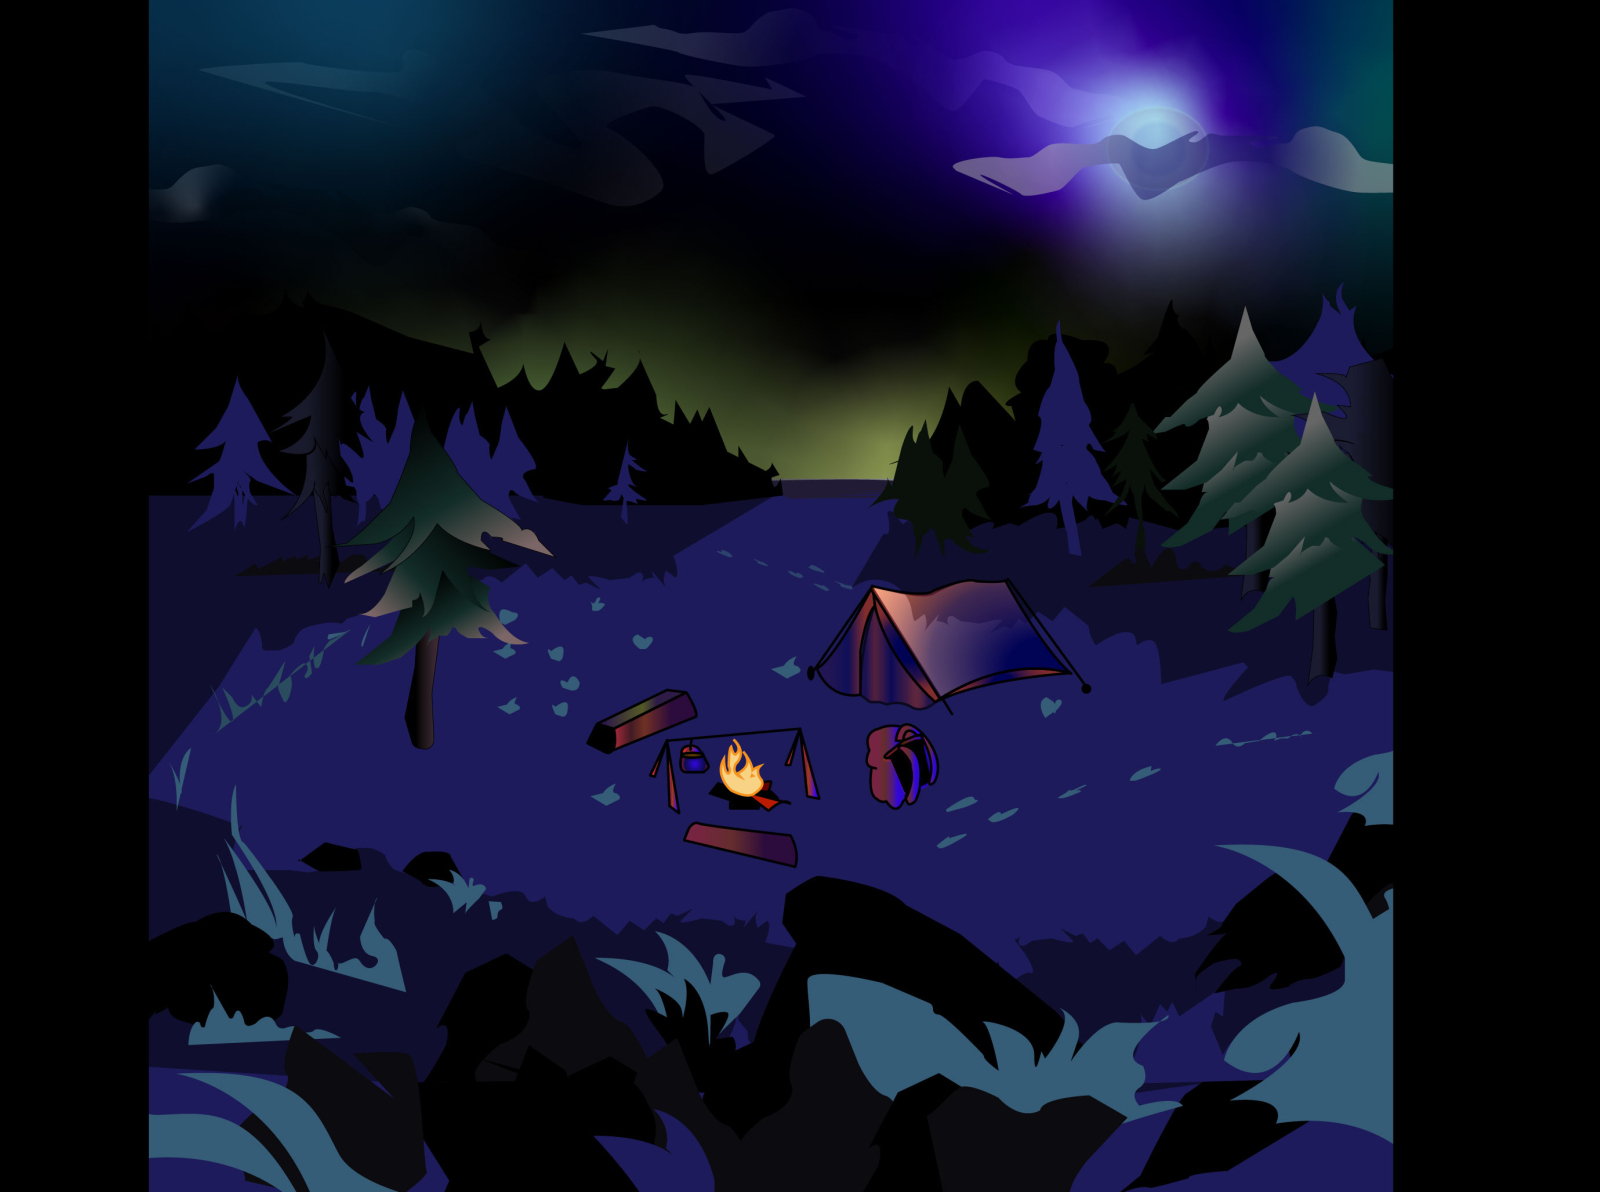 Night Camp by MIKHAIL IceWindXI on Dribbble